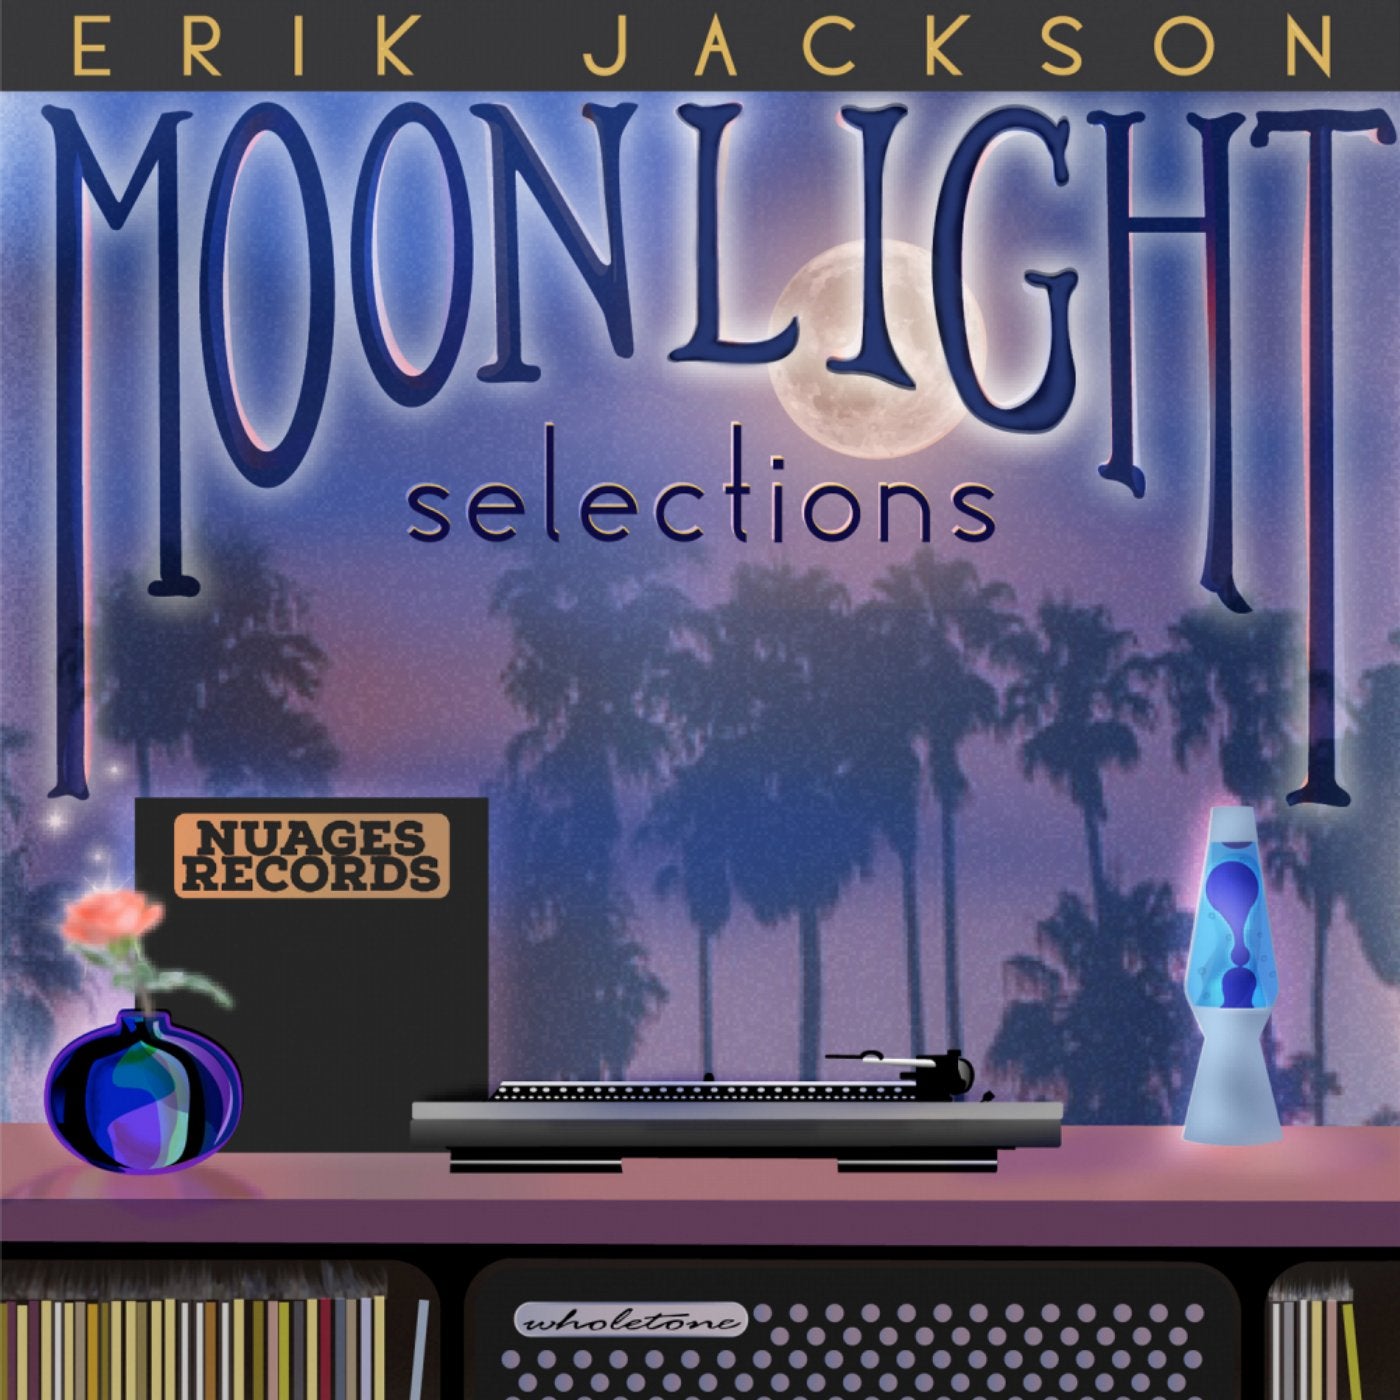 Moonlight Selections